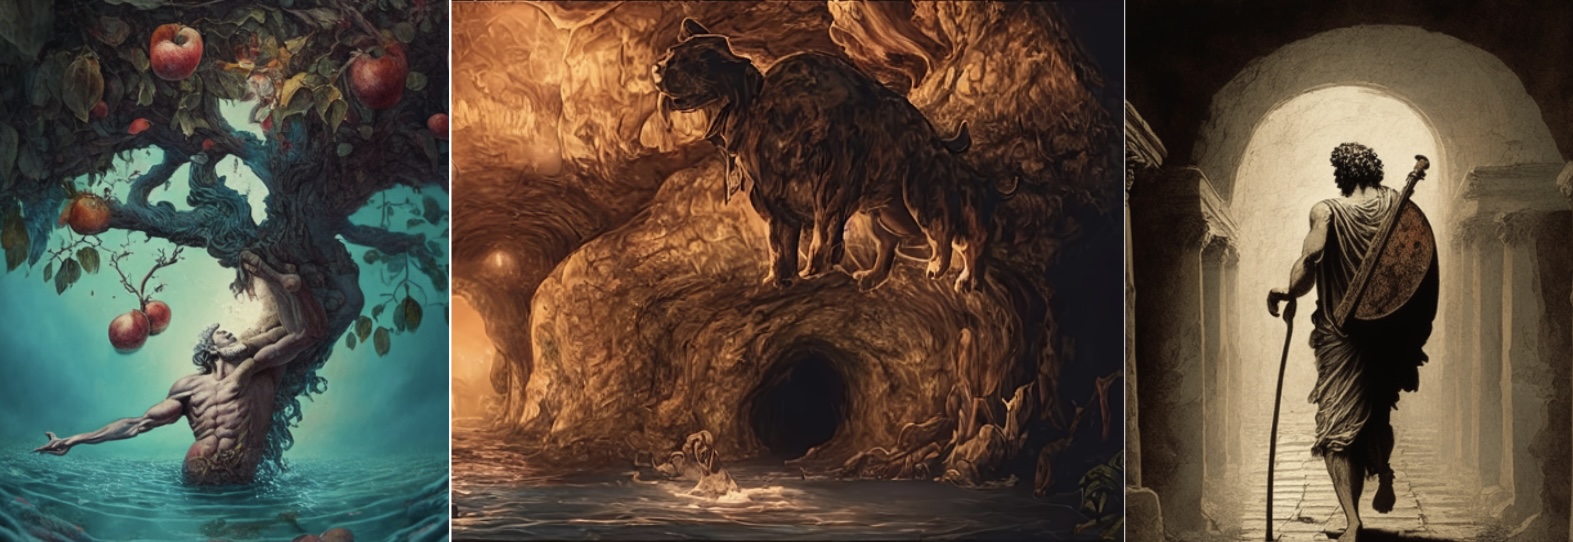 Three images representing figures from Greek Mythology created by students using AI. On the left, a representation of Tantalus, a male figure standing in a pool of water trying to reach an apple on a tree. In the middle a represntation of Cerebus, a beast with multiple arms and legs, standing guard on top of the entrance to a cave surrounded by water to represent the underworld. On the right, a representation of Orpheus, a male figuure carrying a lyre on his back, and walking through a dark tunnel with the aid of a stick, towards an archway opening into the light.